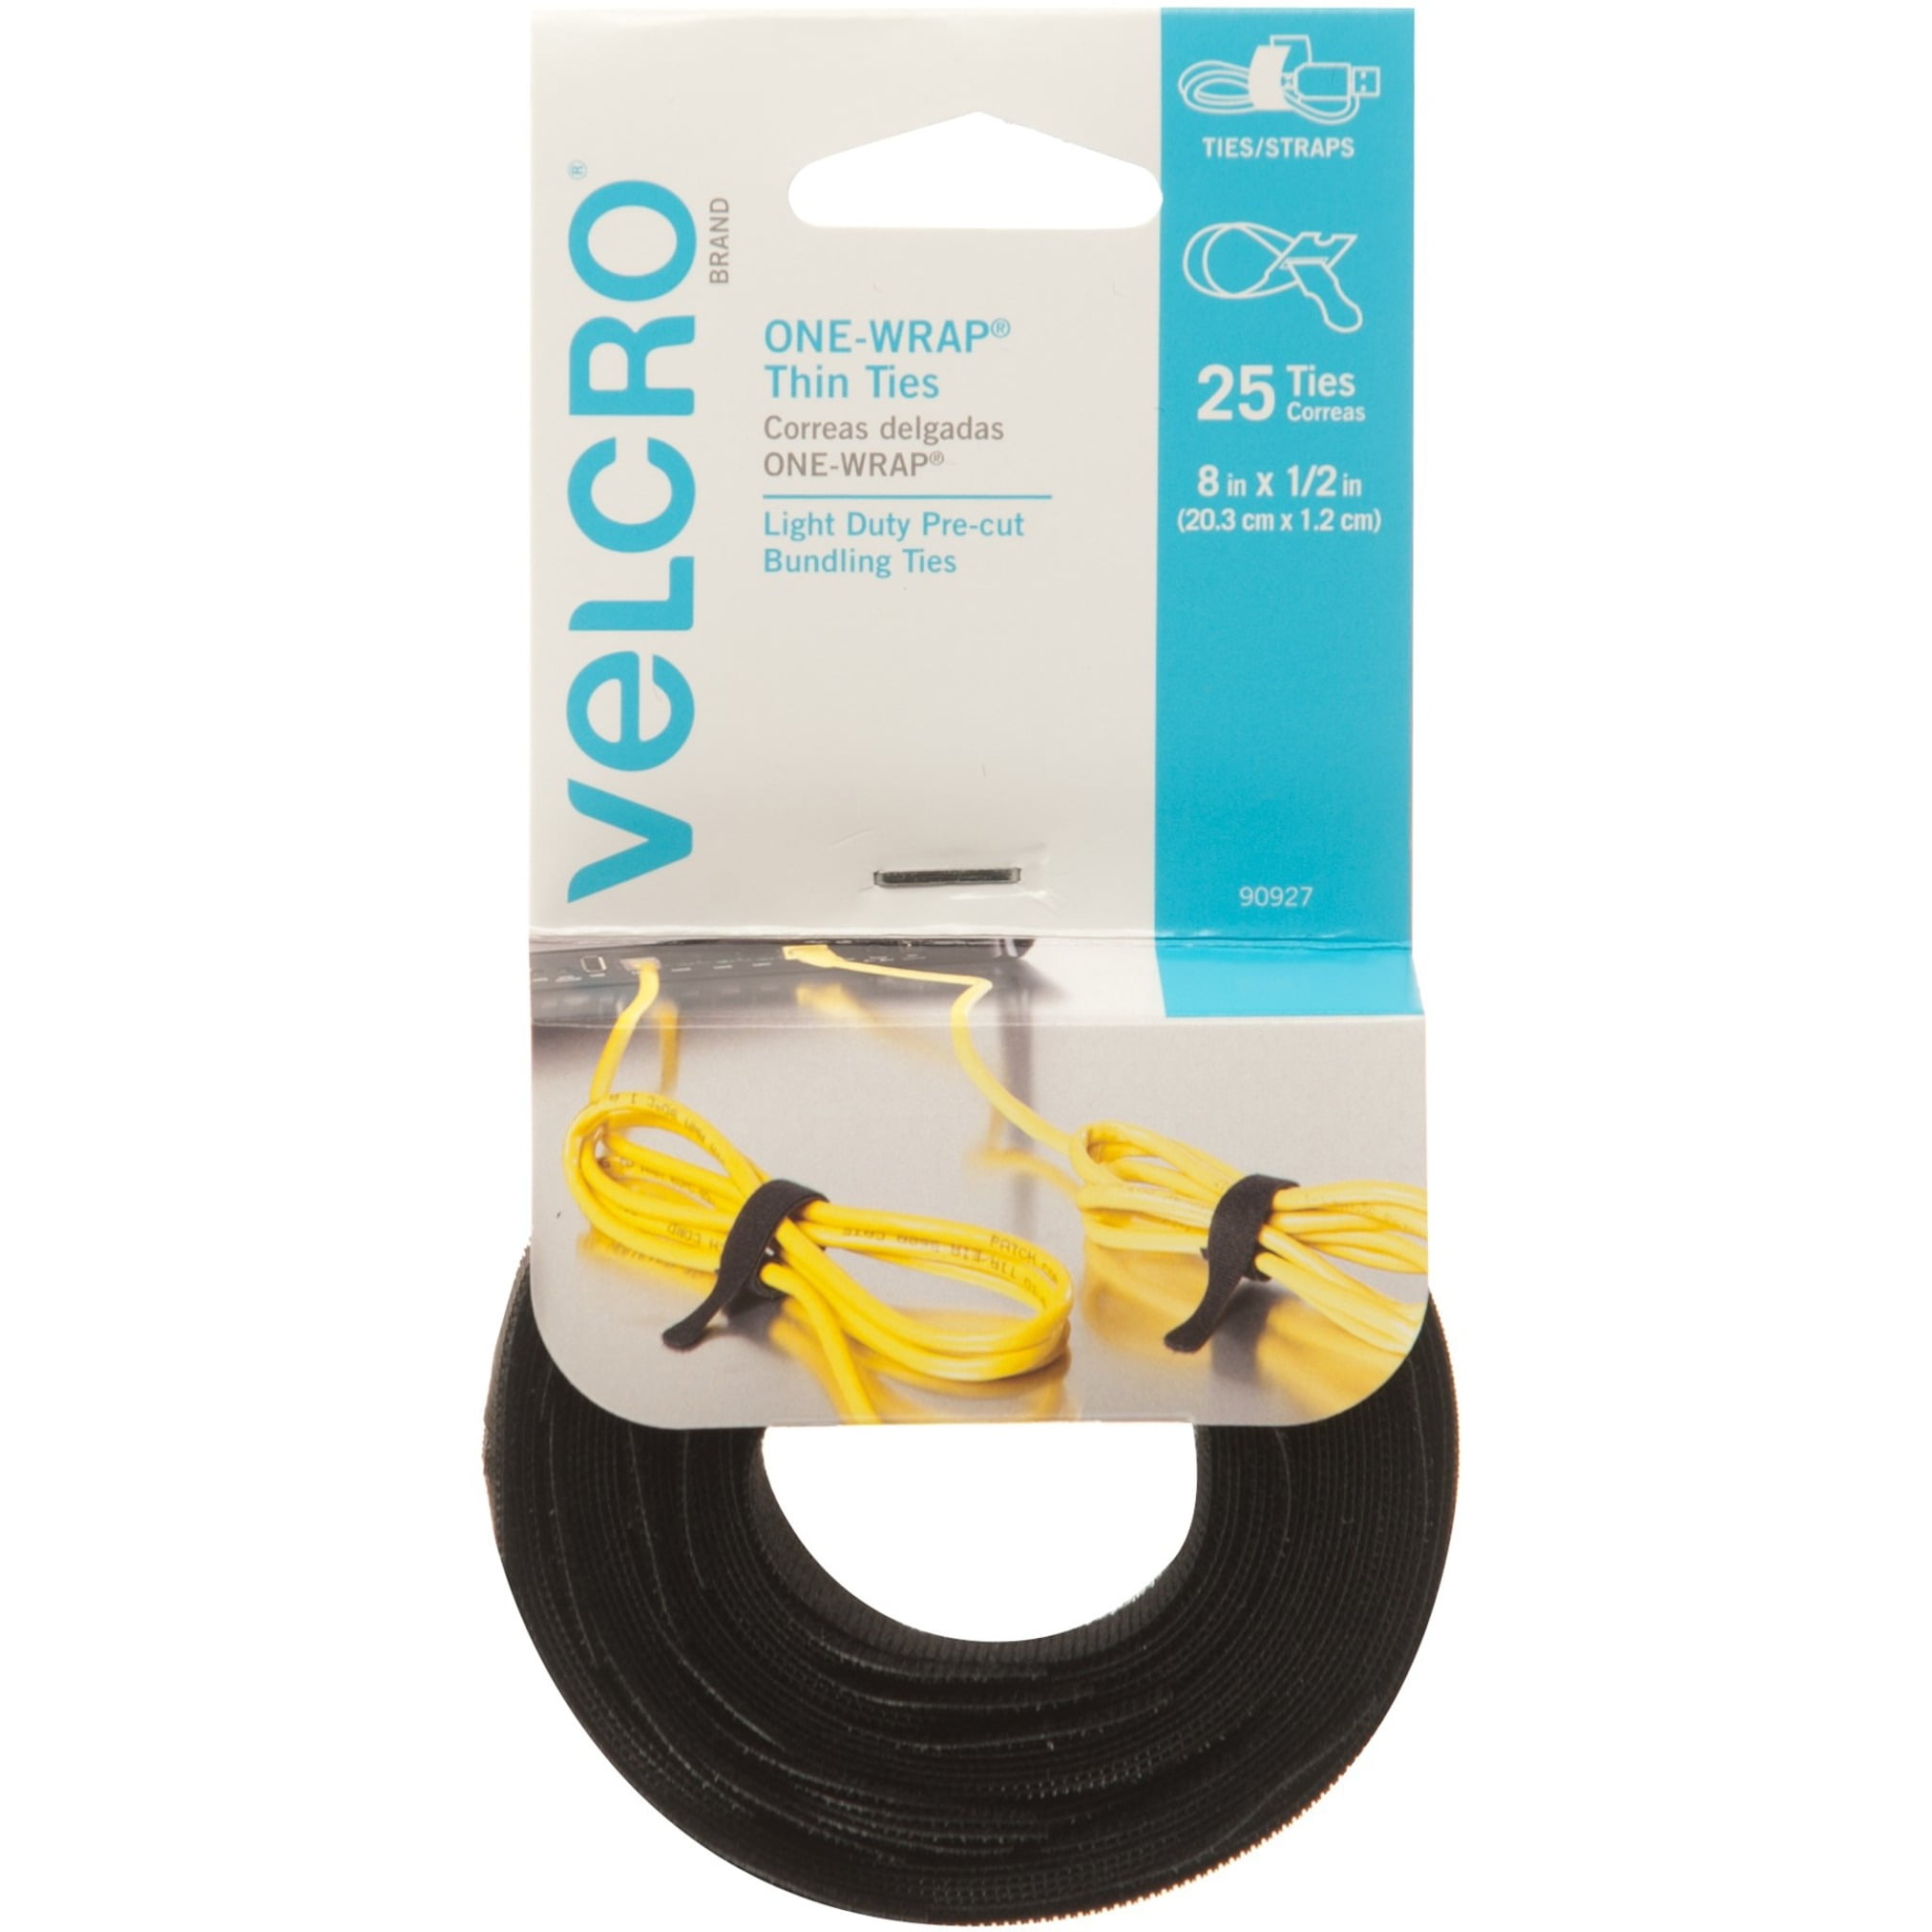 VELCRO Brand ONE WRAP Thin Ties | Strong & Reusable | Perfect for Fastening  Wires & Organizing Cords | Black/Gray, 15in x 1/2-Inch | 30 Count (94257)